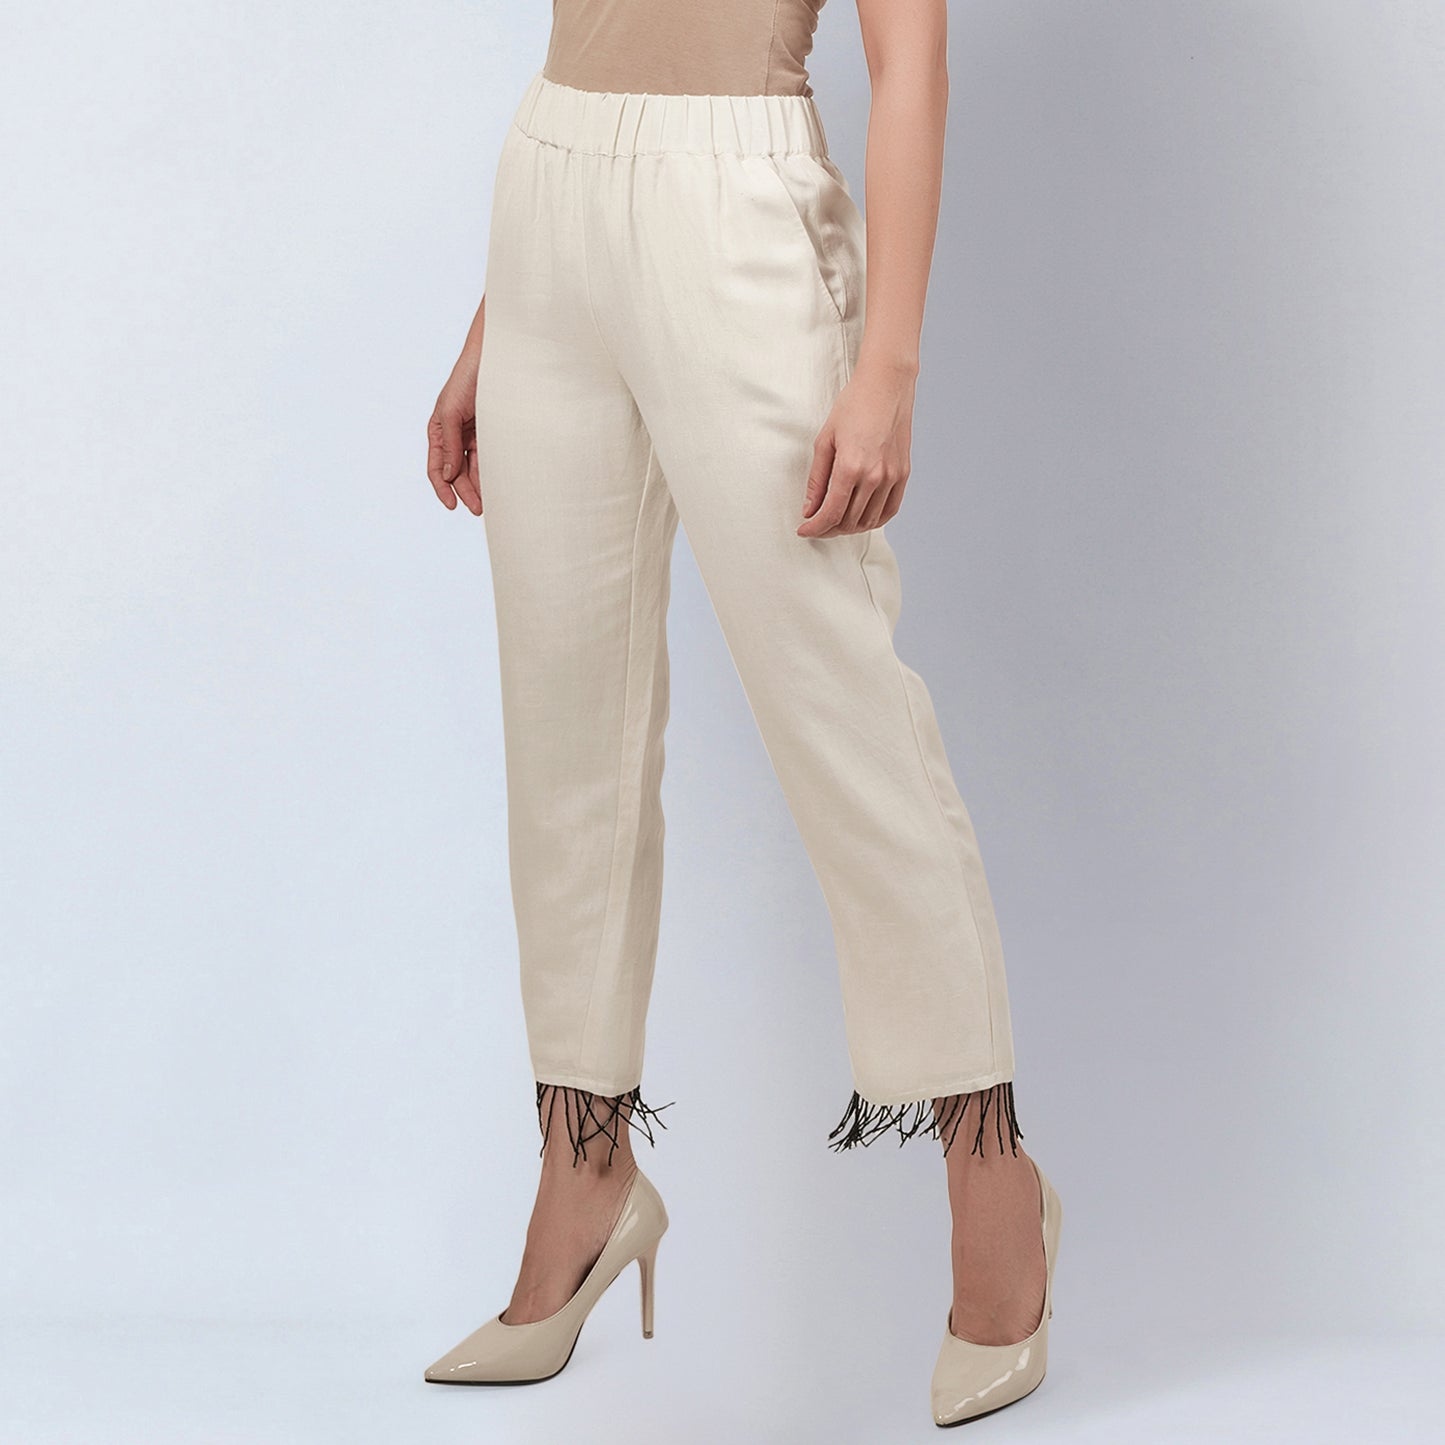 Off White Linen Top and Pants Set with Bead Lace